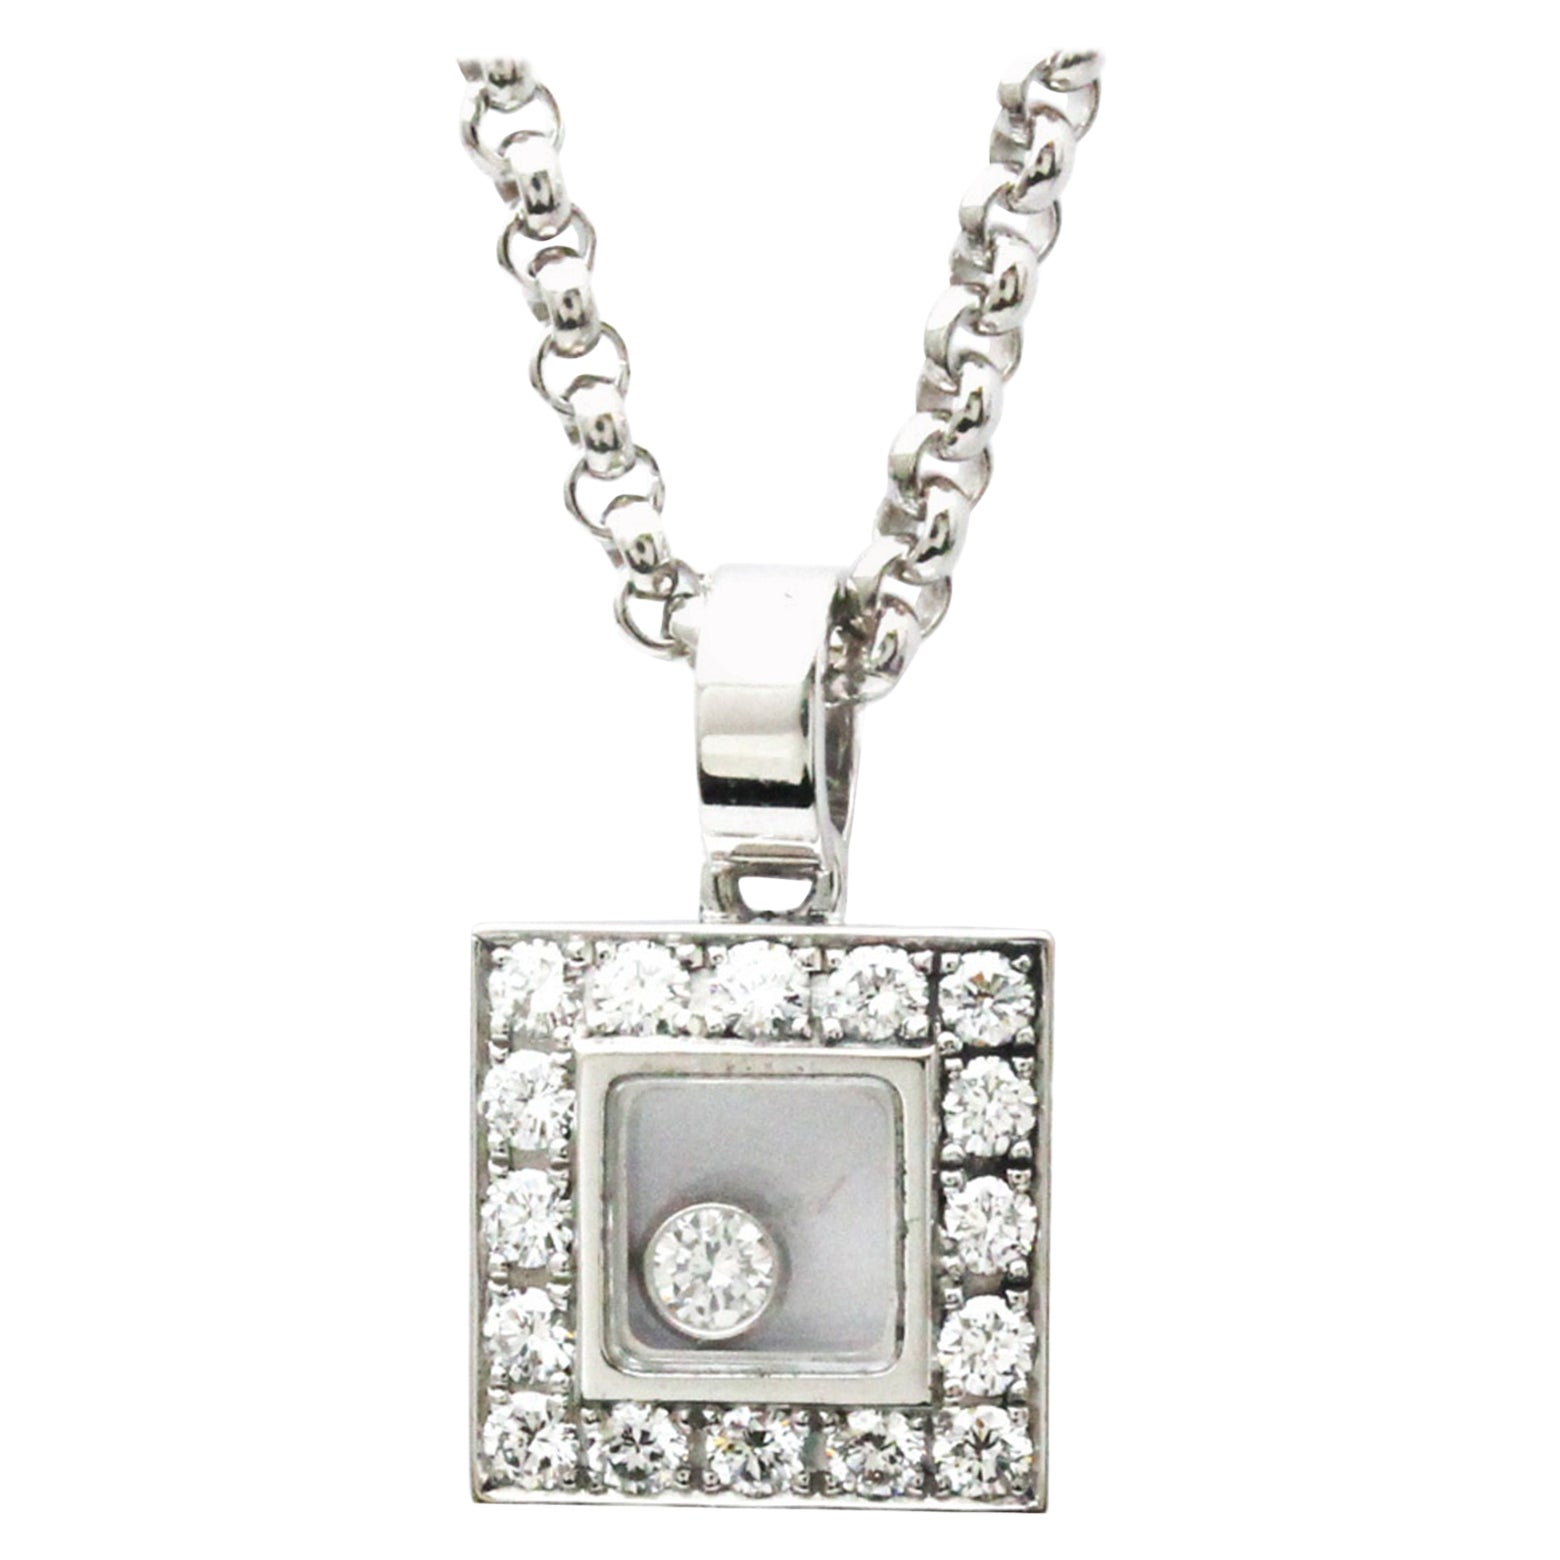 Chopard Diamond Pendant Necklace in 18K White Gold For Sale